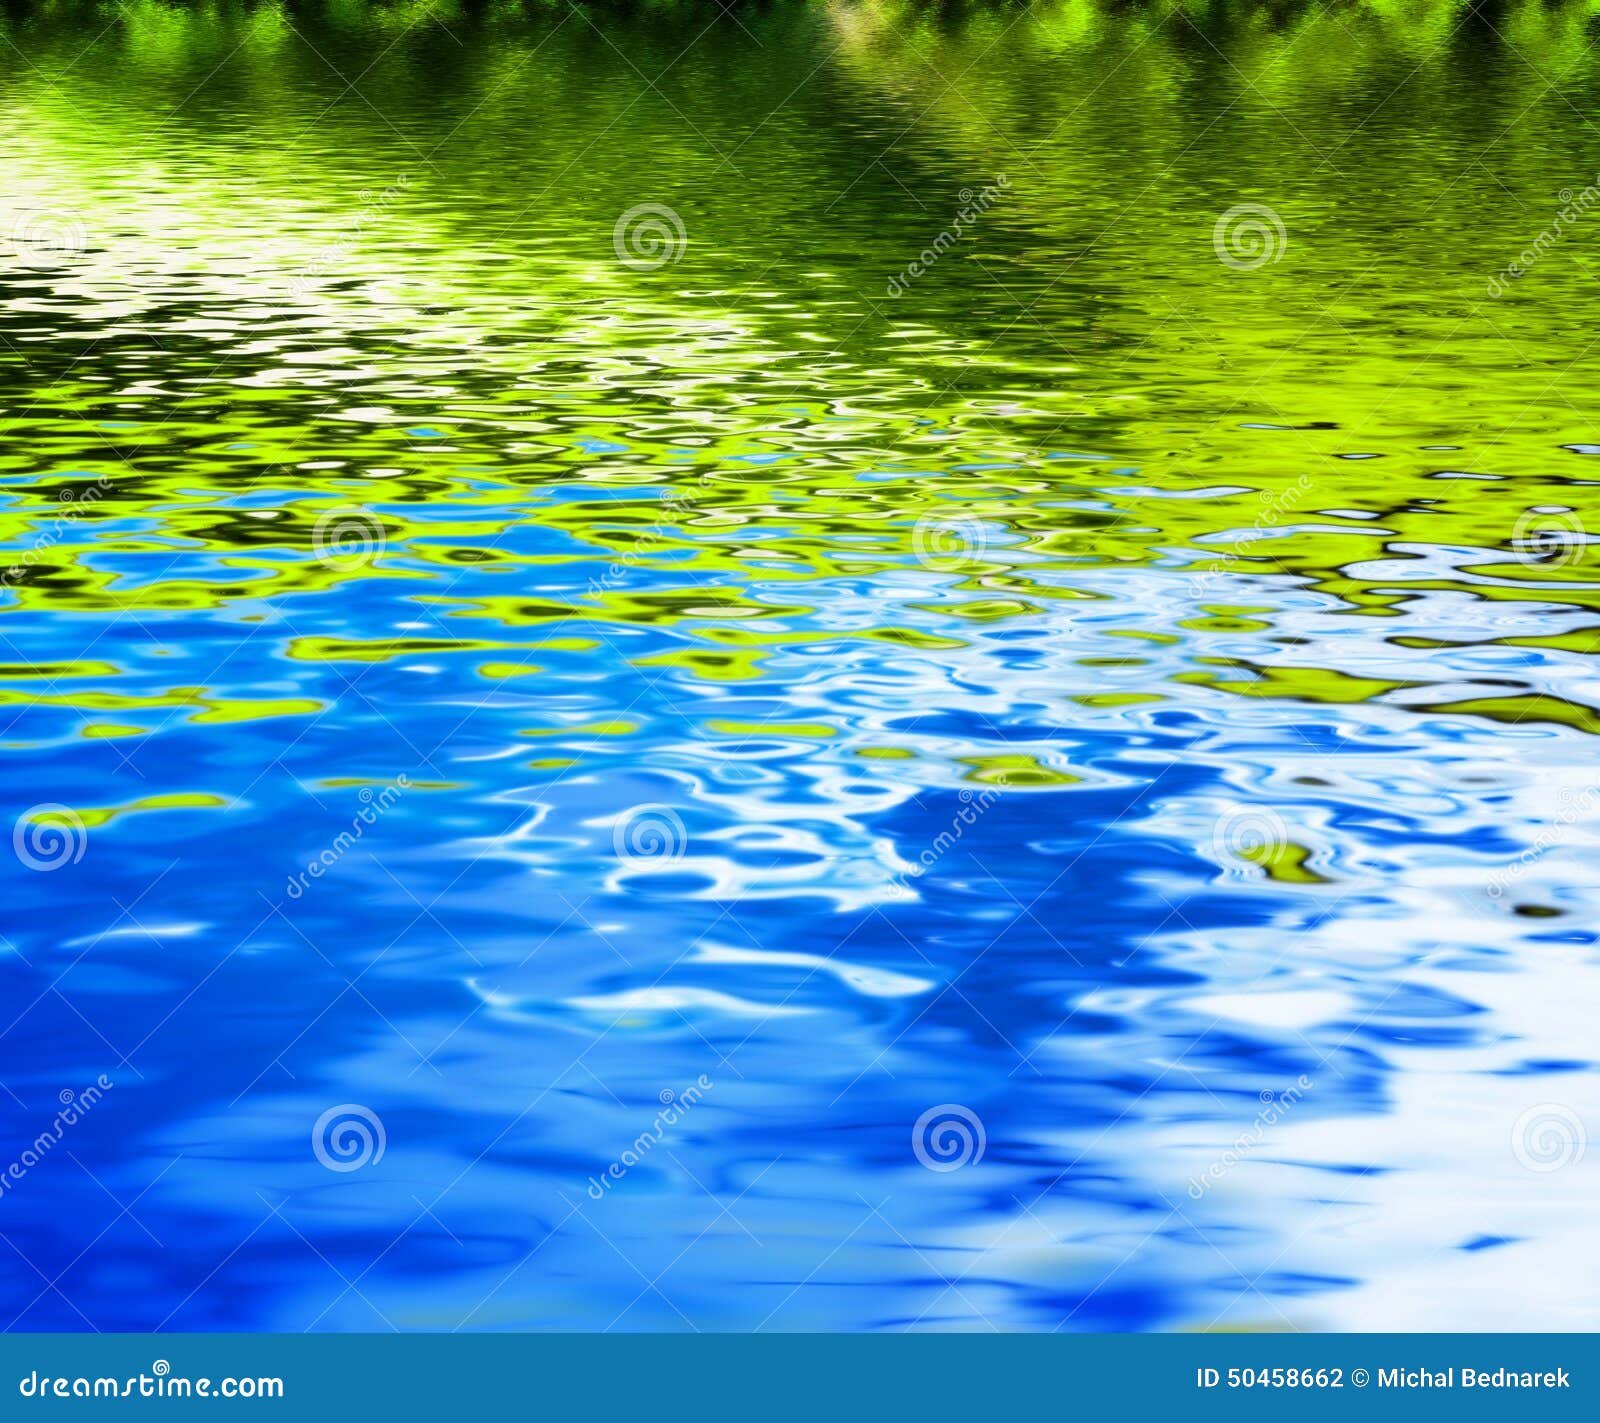 reflection of green nature in clean water waves.